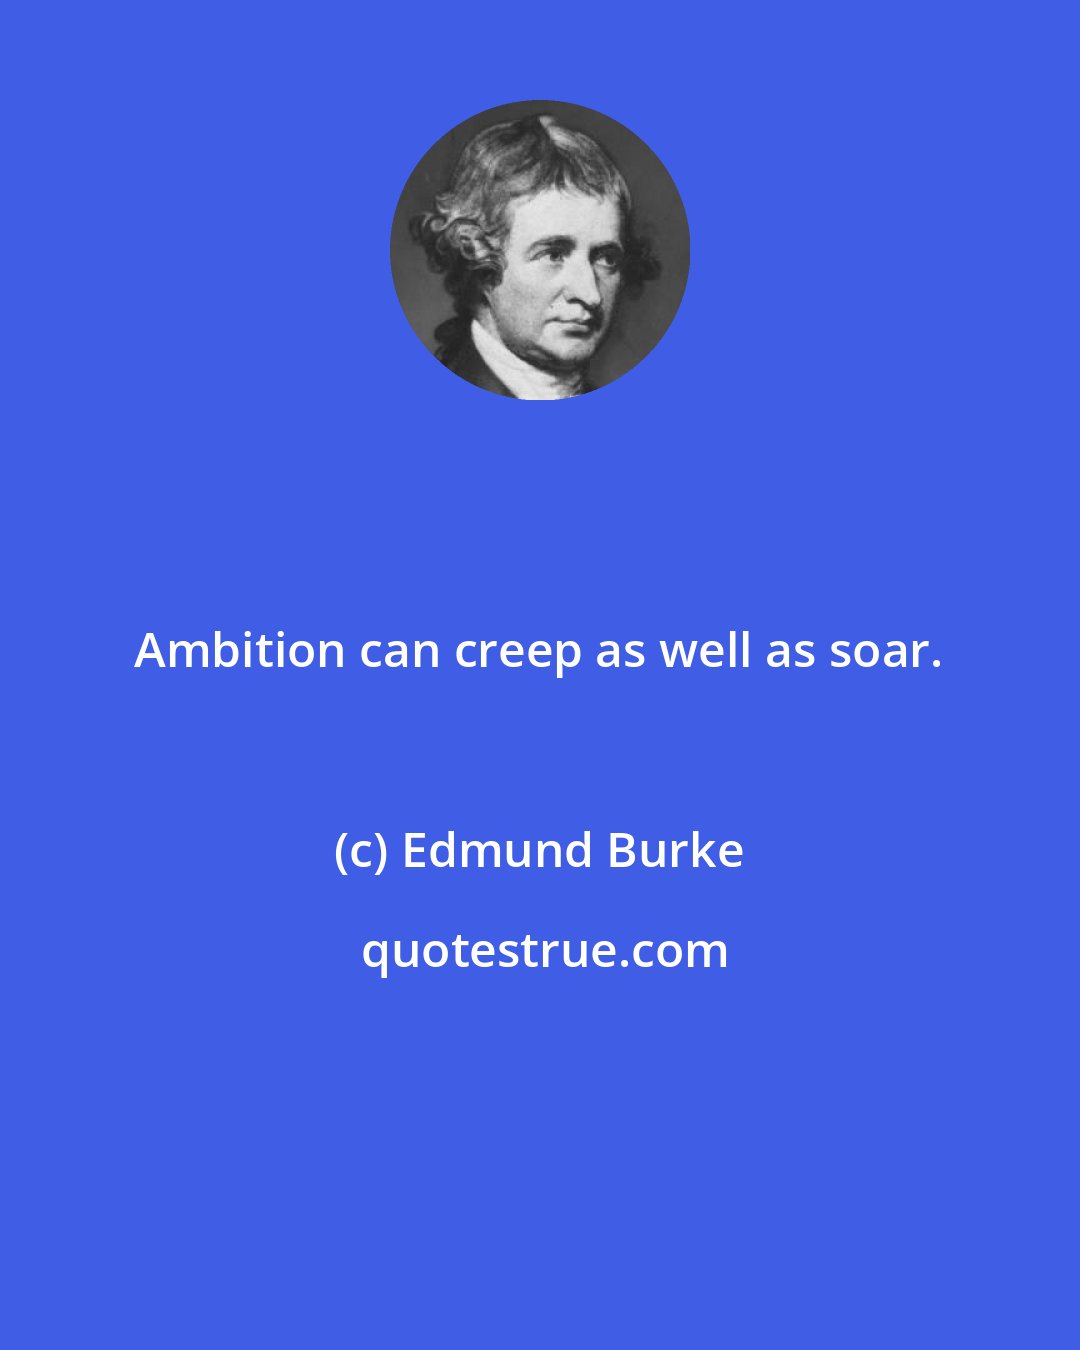 Edmund Burke: Ambition can creep as well as soar.